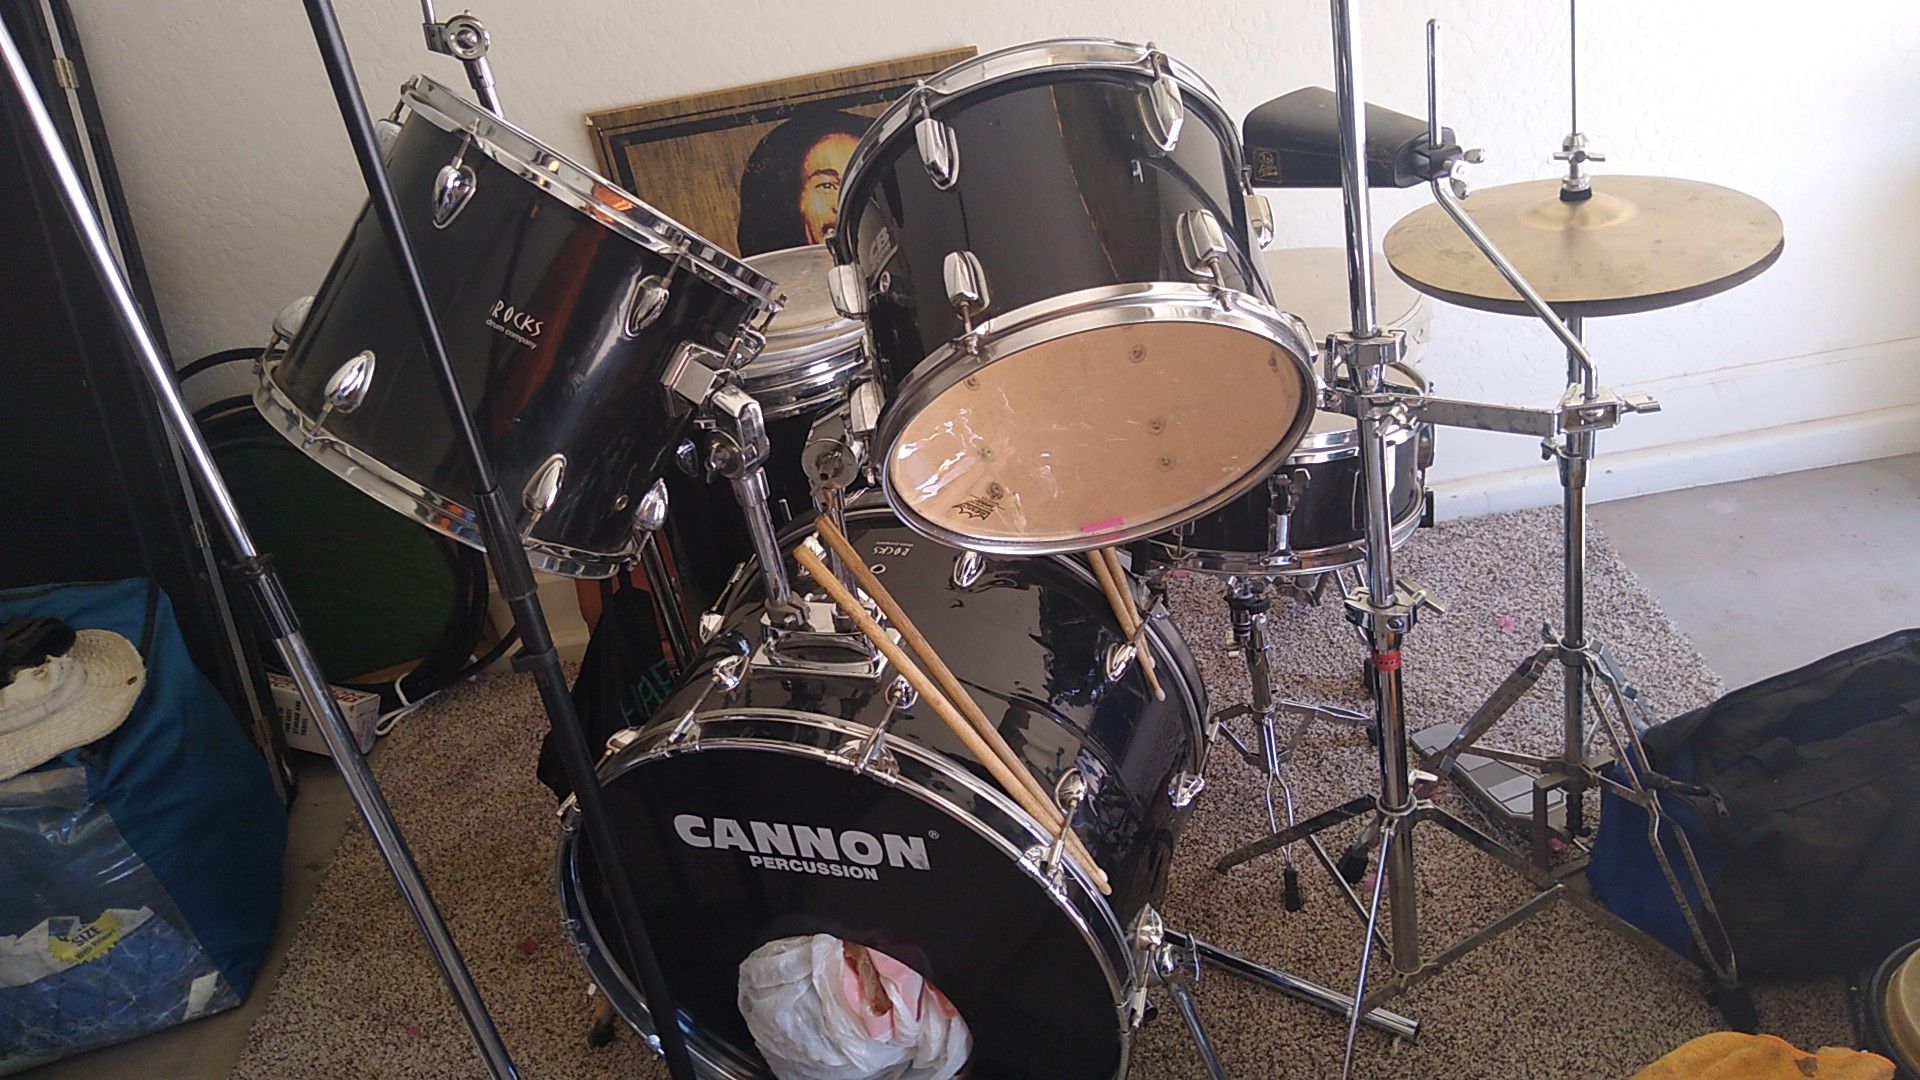 Cannon percussion Drums